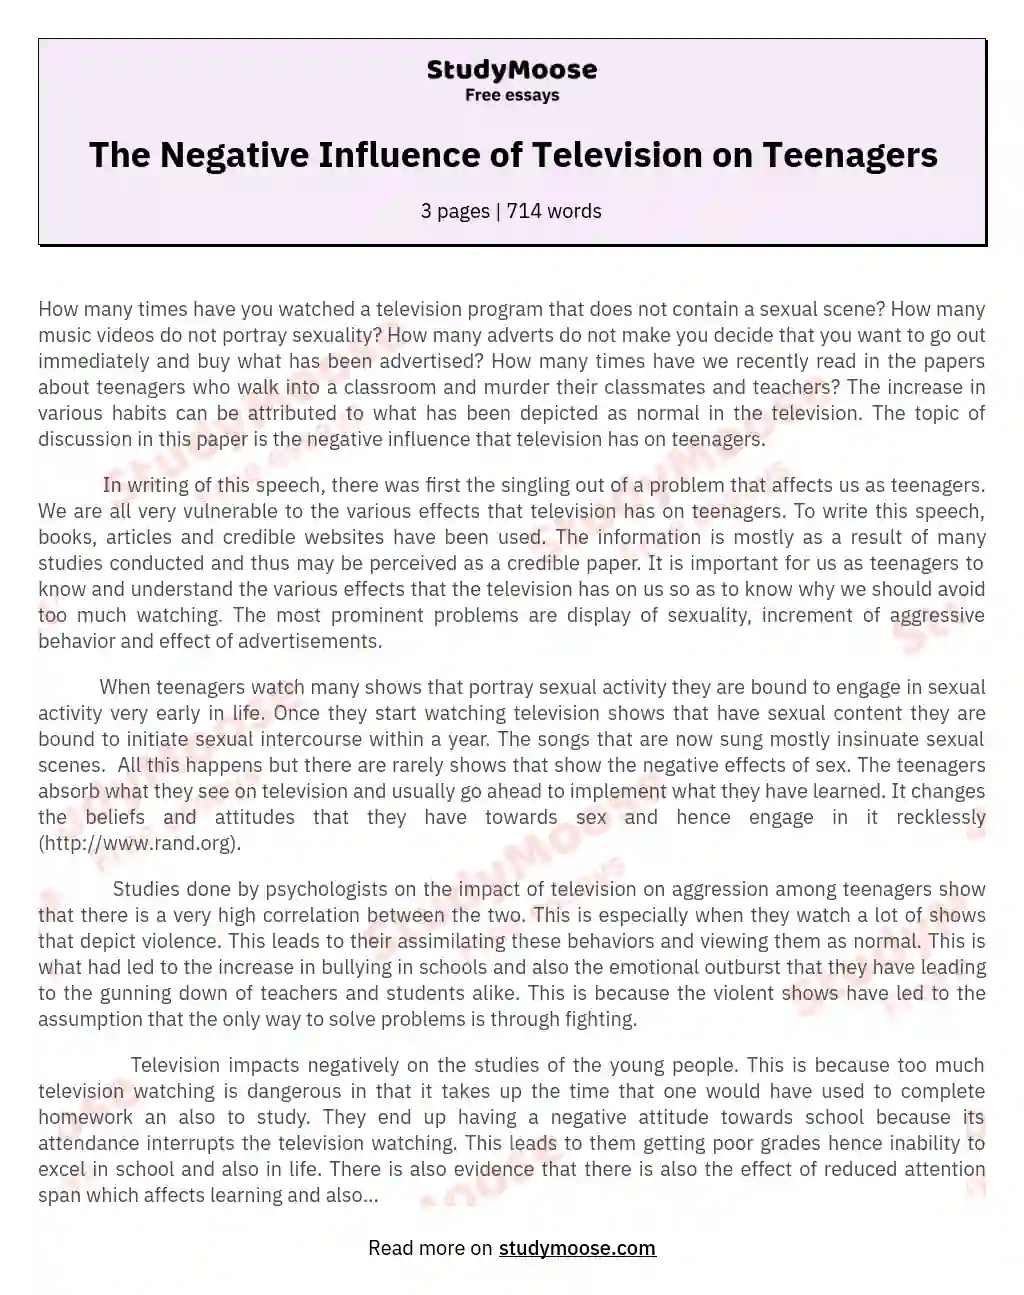 The Negative Influence of Television on Teenagers essay